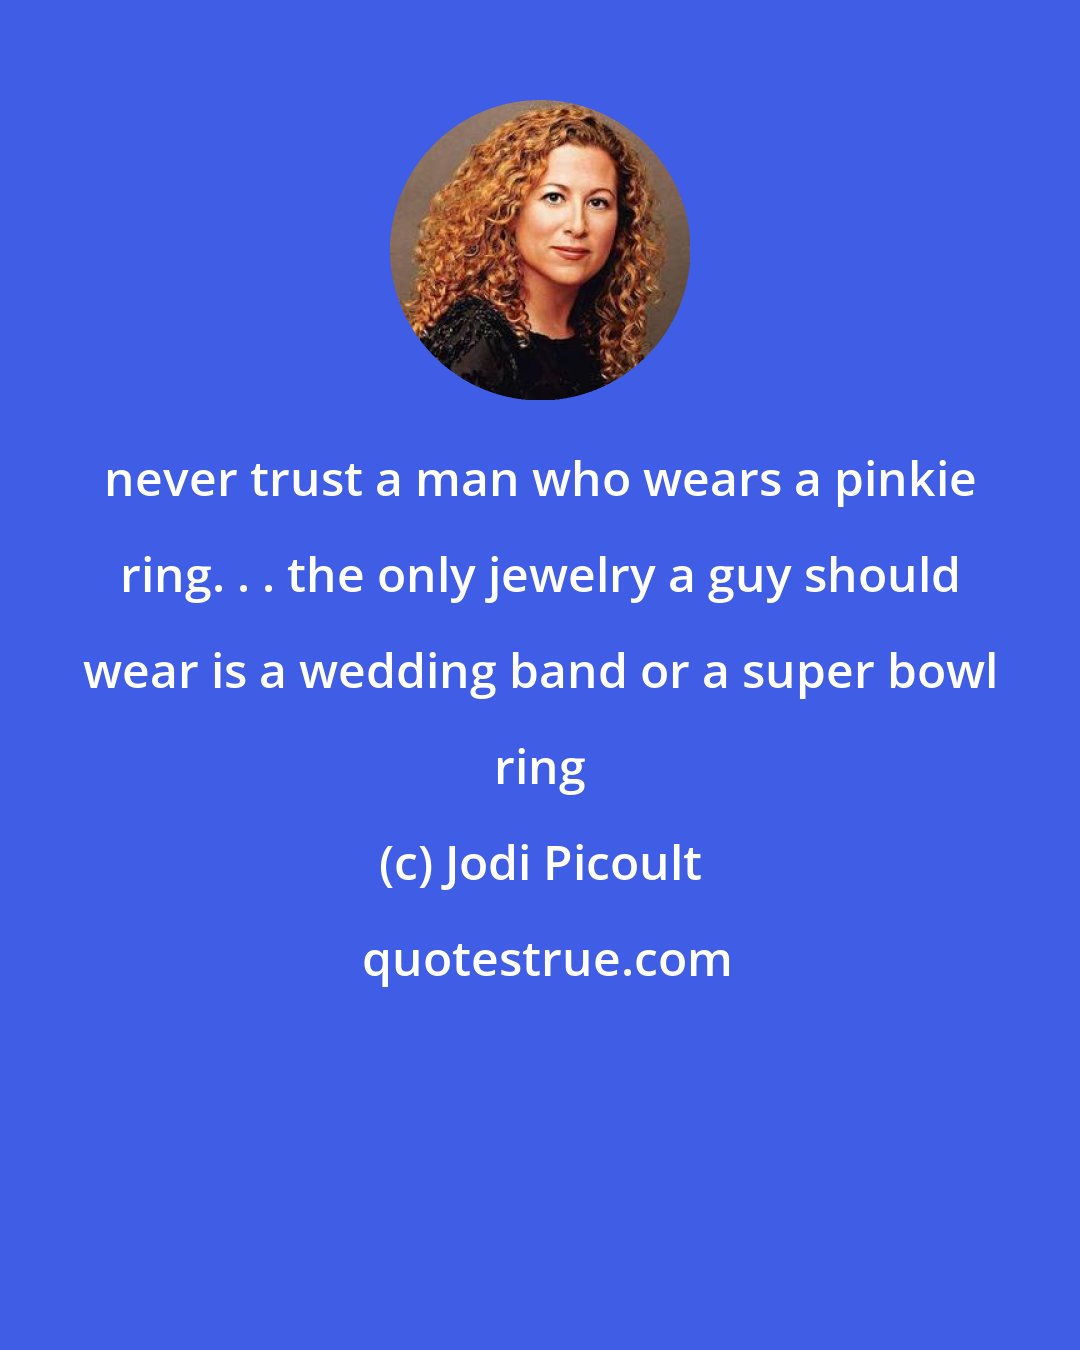 Jodi Picoult: never trust a man who wears a pinkie ring. . . the only jewelry a guy should wear is a wedding band or a super bowl ring